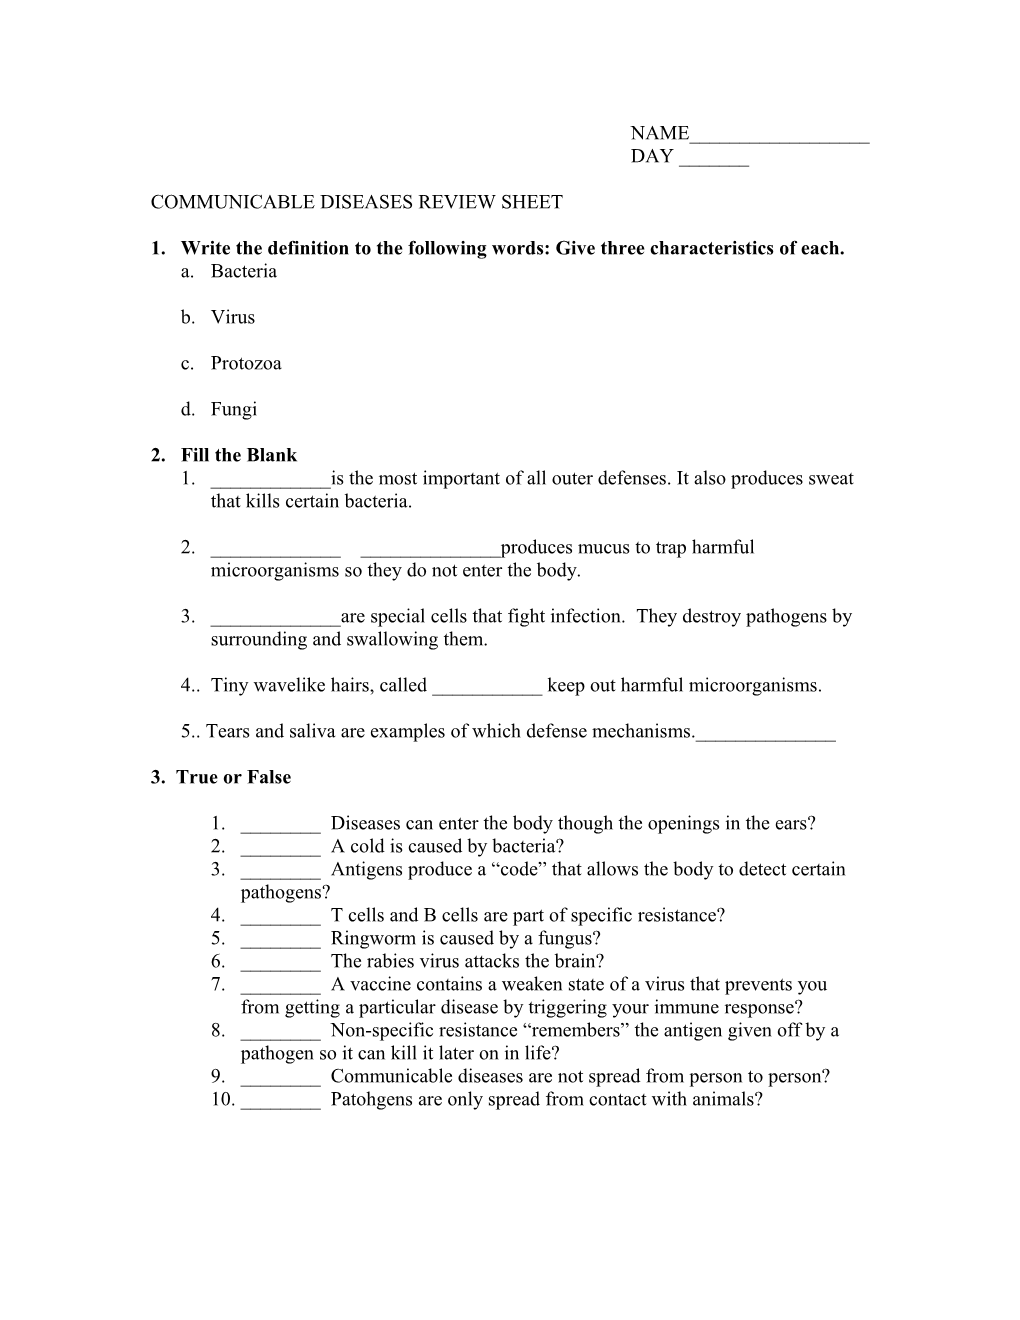 Communicable Diseases Review Sheet